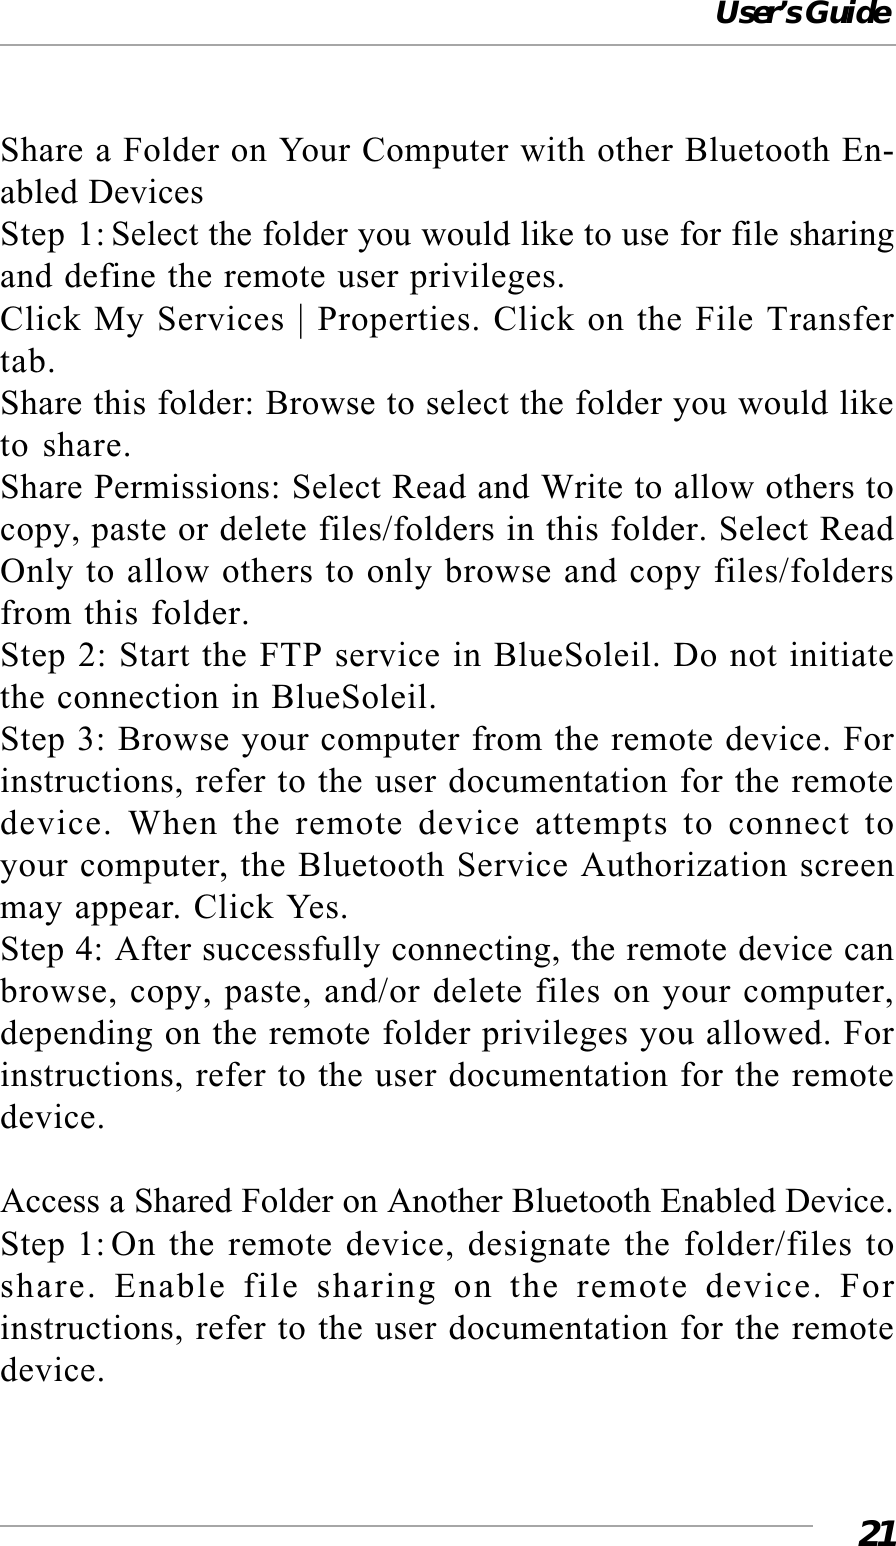 User’s Guide21Share a Folder on Your Computer with other Bluetooth En-abled DevicesStep 1: Select the folder you would like to use for file sharingand define the remote user privileges.Click My Services | Properties. Click on the File Transfertab.Share this folder: Browse to select the folder you would liketo share.Share Permissions: Select Read and Write to allow others tocopy, paste or delete files/folders in this folder. Select ReadOnly to allow others to only browse and copy files/foldersfrom this folder.Step 2: Start the FTP service in BlueSoleil. Do not initiatethe connection in BlueSoleil.Step 3: Browse your computer from the remote device. Forinstructions, refer to the user documentation for the remotedevice. When the remote device attempts to connect toyour computer, the Bluetooth Service Authorization screenmay appear. Click Yes.Step 4: After successfully connecting, the remote device canbrowse, copy, paste, and/or delete files on your computer,depending on the remote folder privileges you allowed. Forinstructions, refer to the user documentation for the remotedevice.Access a Shared Folder on Another Bluetooth Enabled Device.Step 1:On the remote device, designate the folder/files toshare. Enable file sharing on the remote device. Forinstructions, refer to the user documentation for the remotedevice.